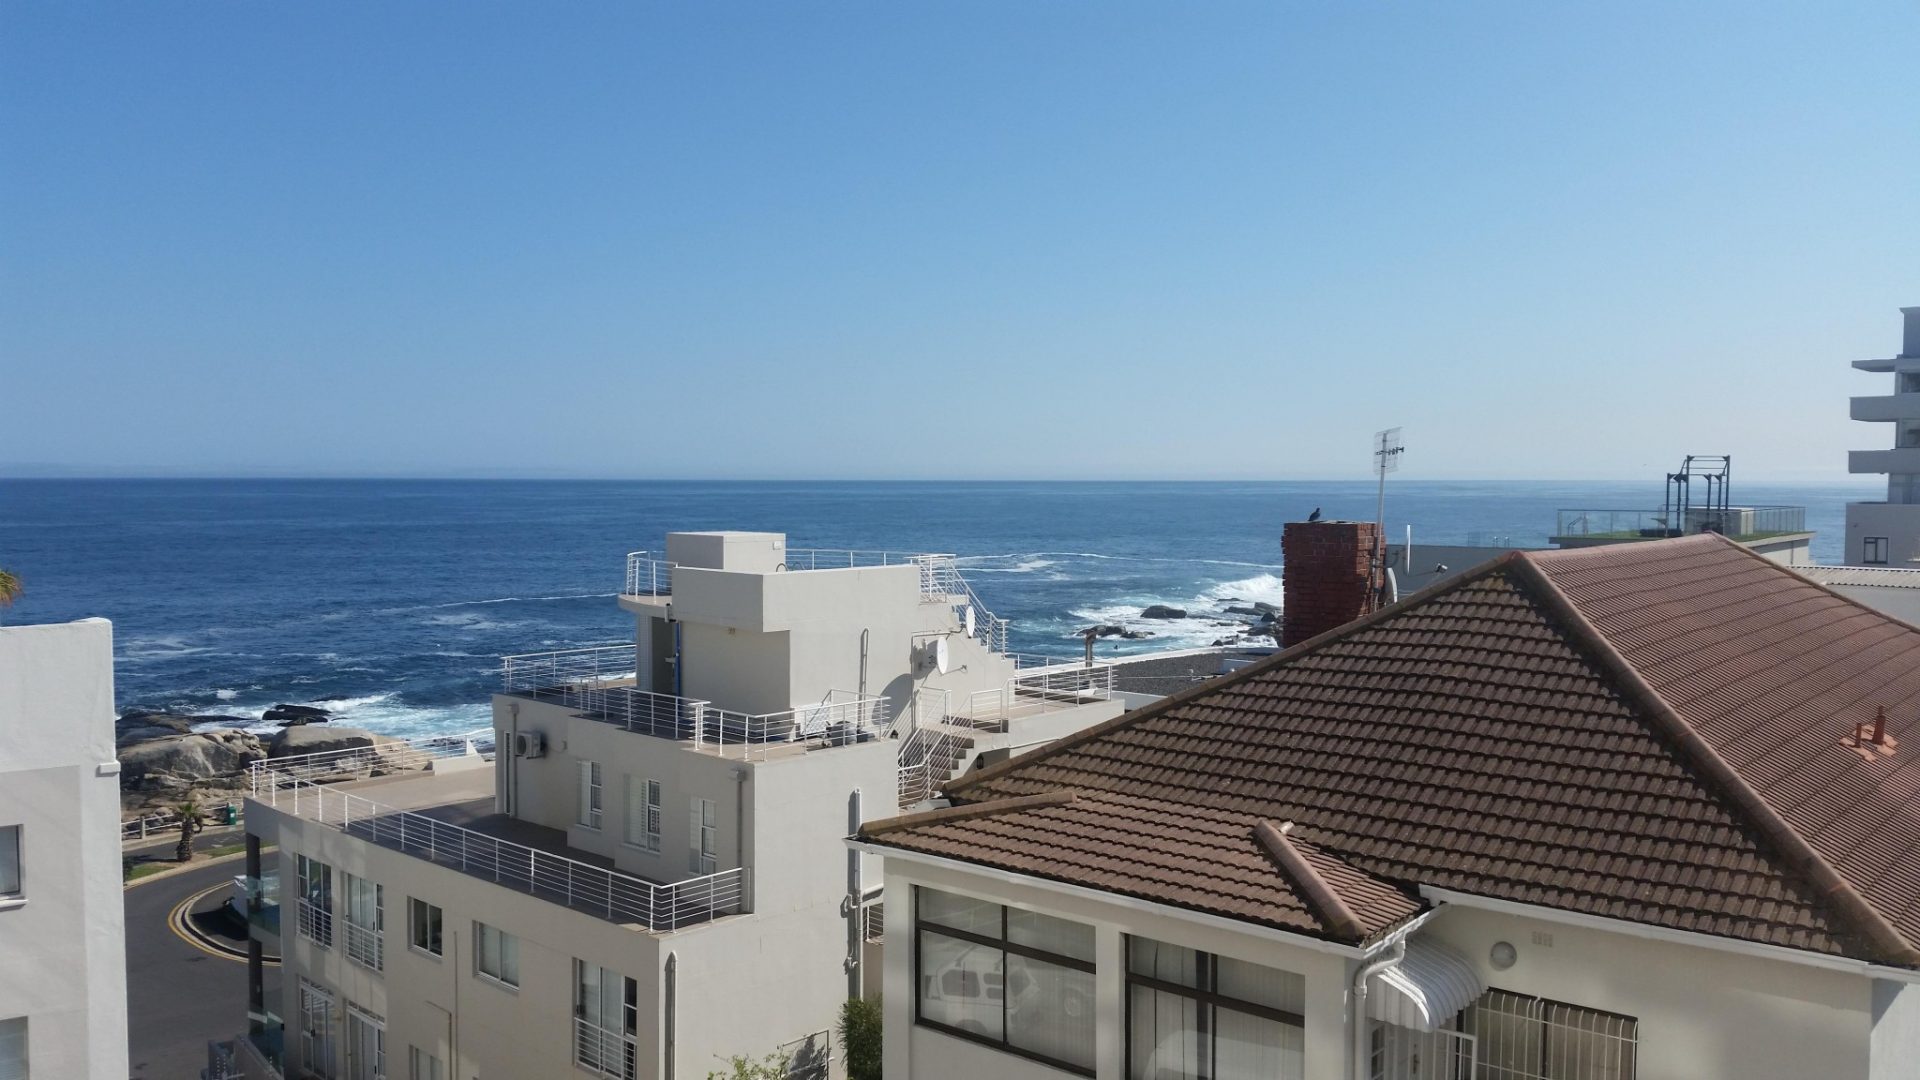 Photo 2 of Seacliffe 405 accommodation in Bantry Bay, Cape Town with 2 bedrooms and 2 bathrooms